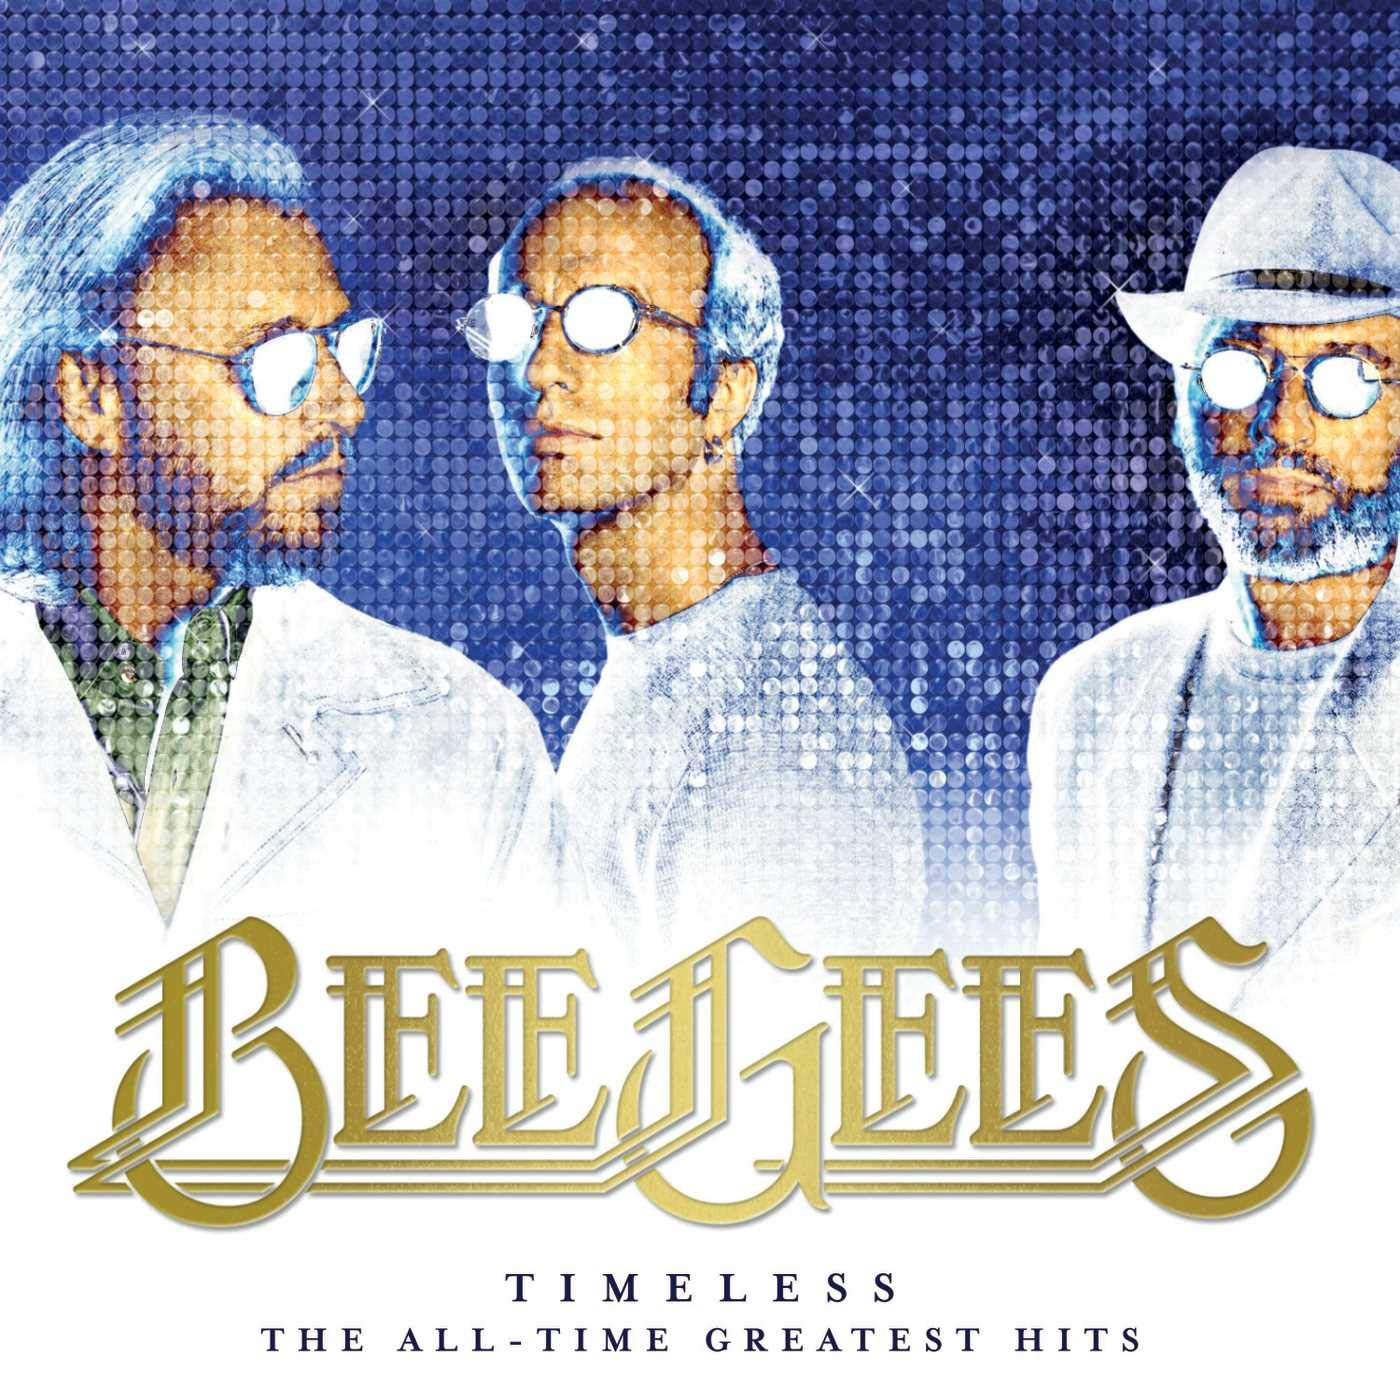 BEE GEES - TIMELESS: THE ALL-TIME GREATEST HITS - VINYL LP